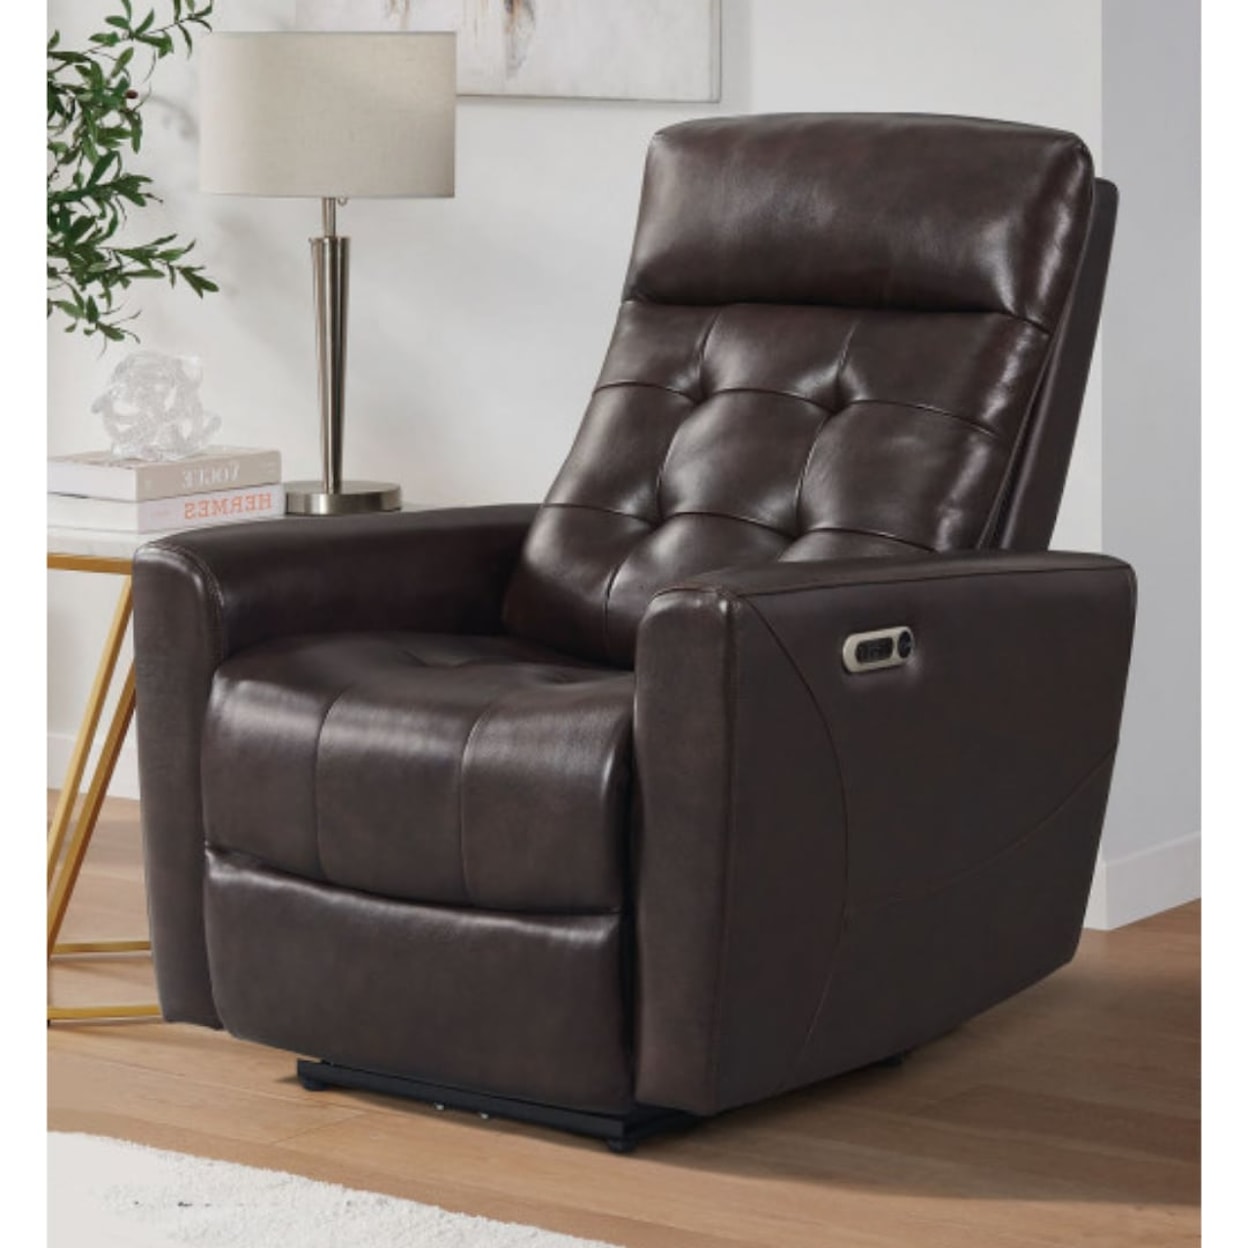 Elements International MVP Leather Recliners MVP LEATHER CHOCOLATE DOUBLE POWER | RECLINE